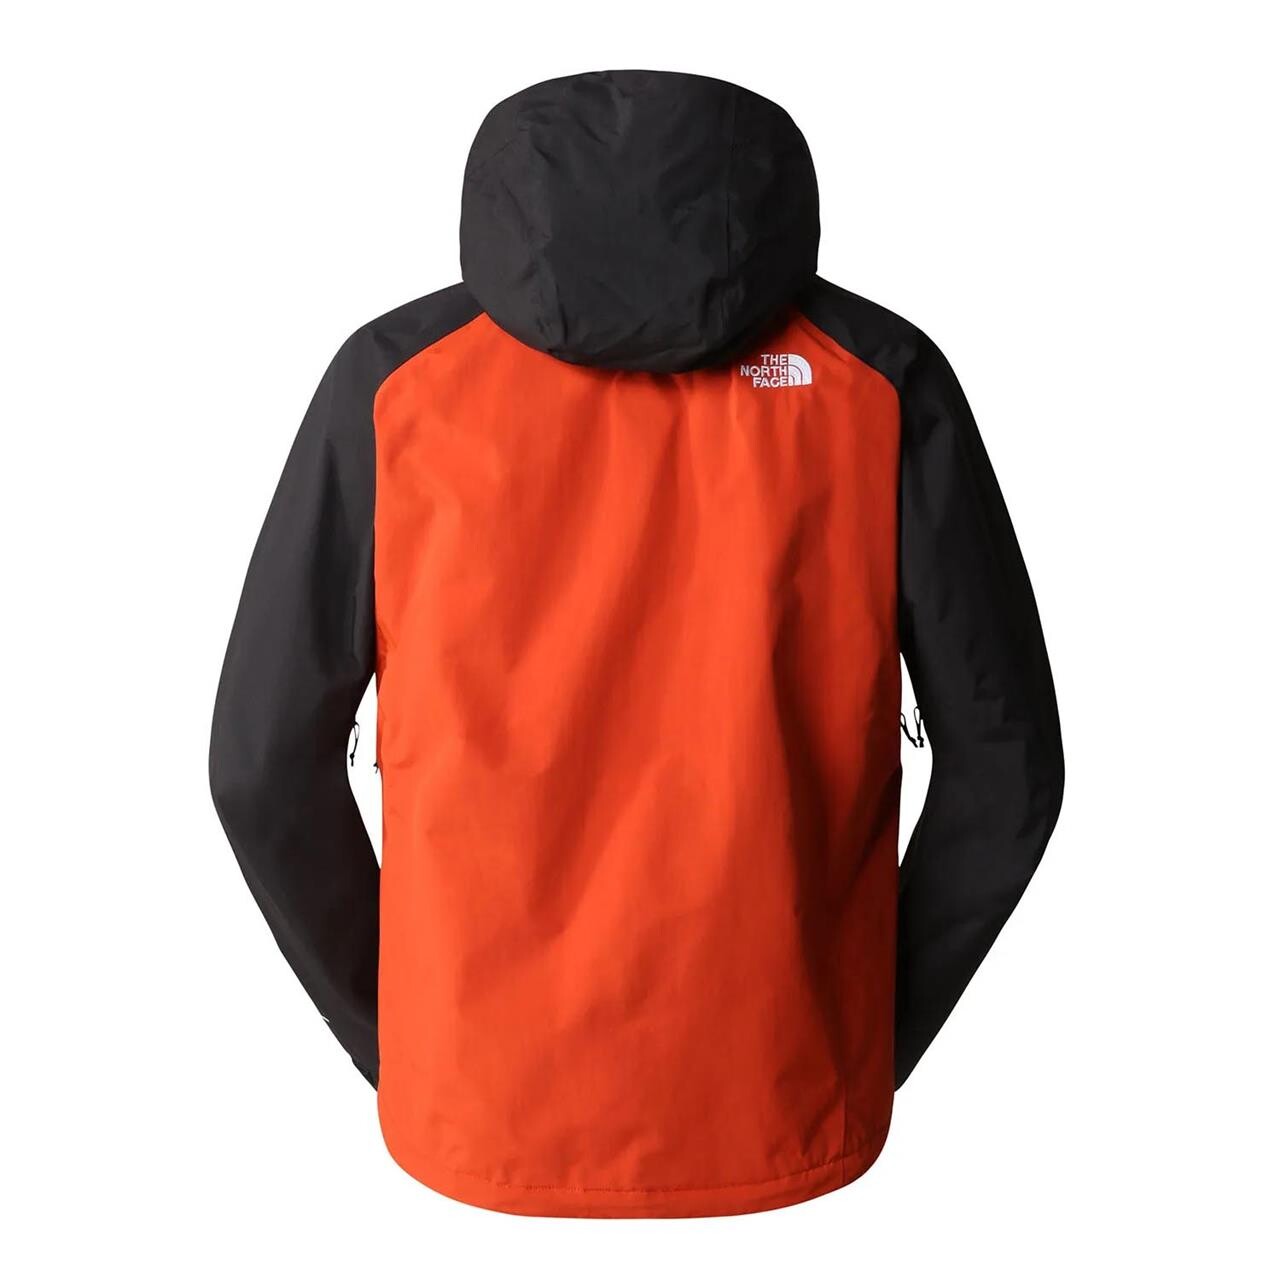 Se The North Face Mens Stratos Jacket (Orange (RUSTED BRONZE/ARRW YELLOW/BLK) Small) hos Friluftsland.dk